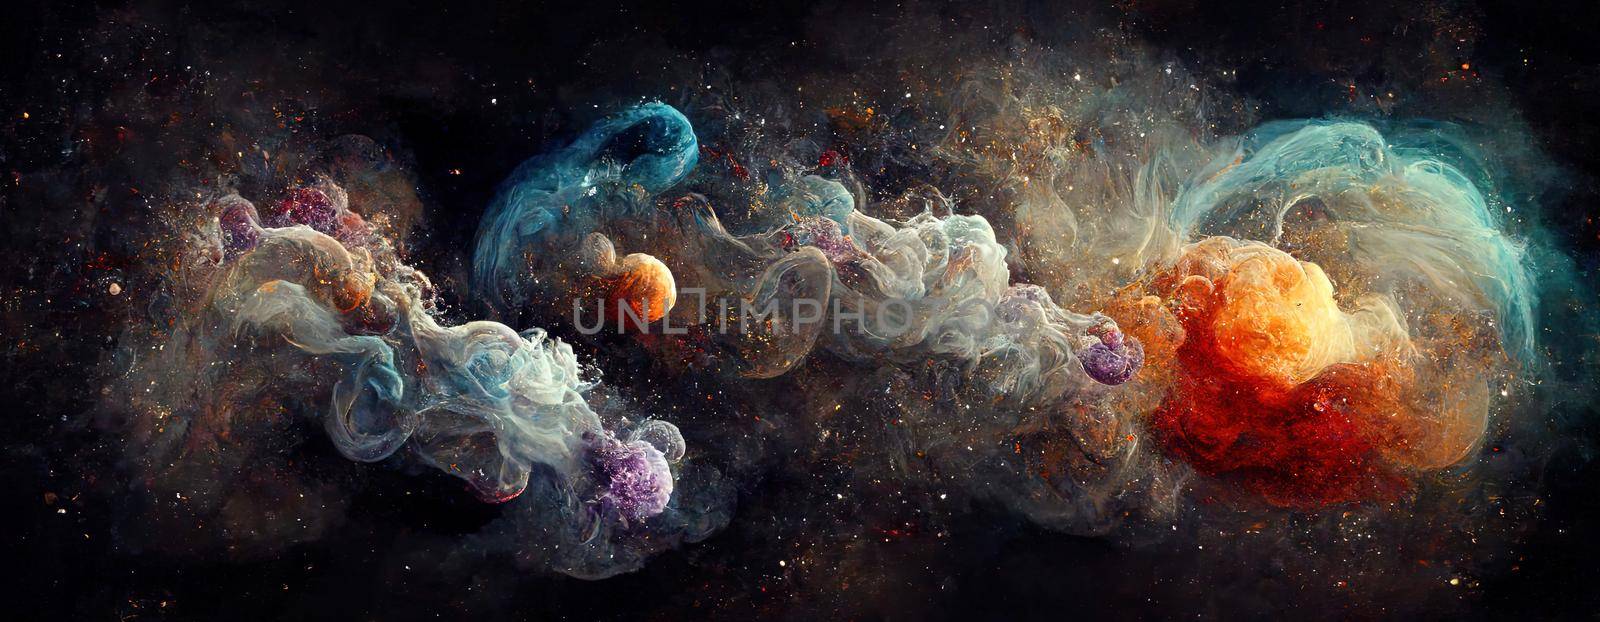 abstract space landscape with nebulae and stars on a black background.